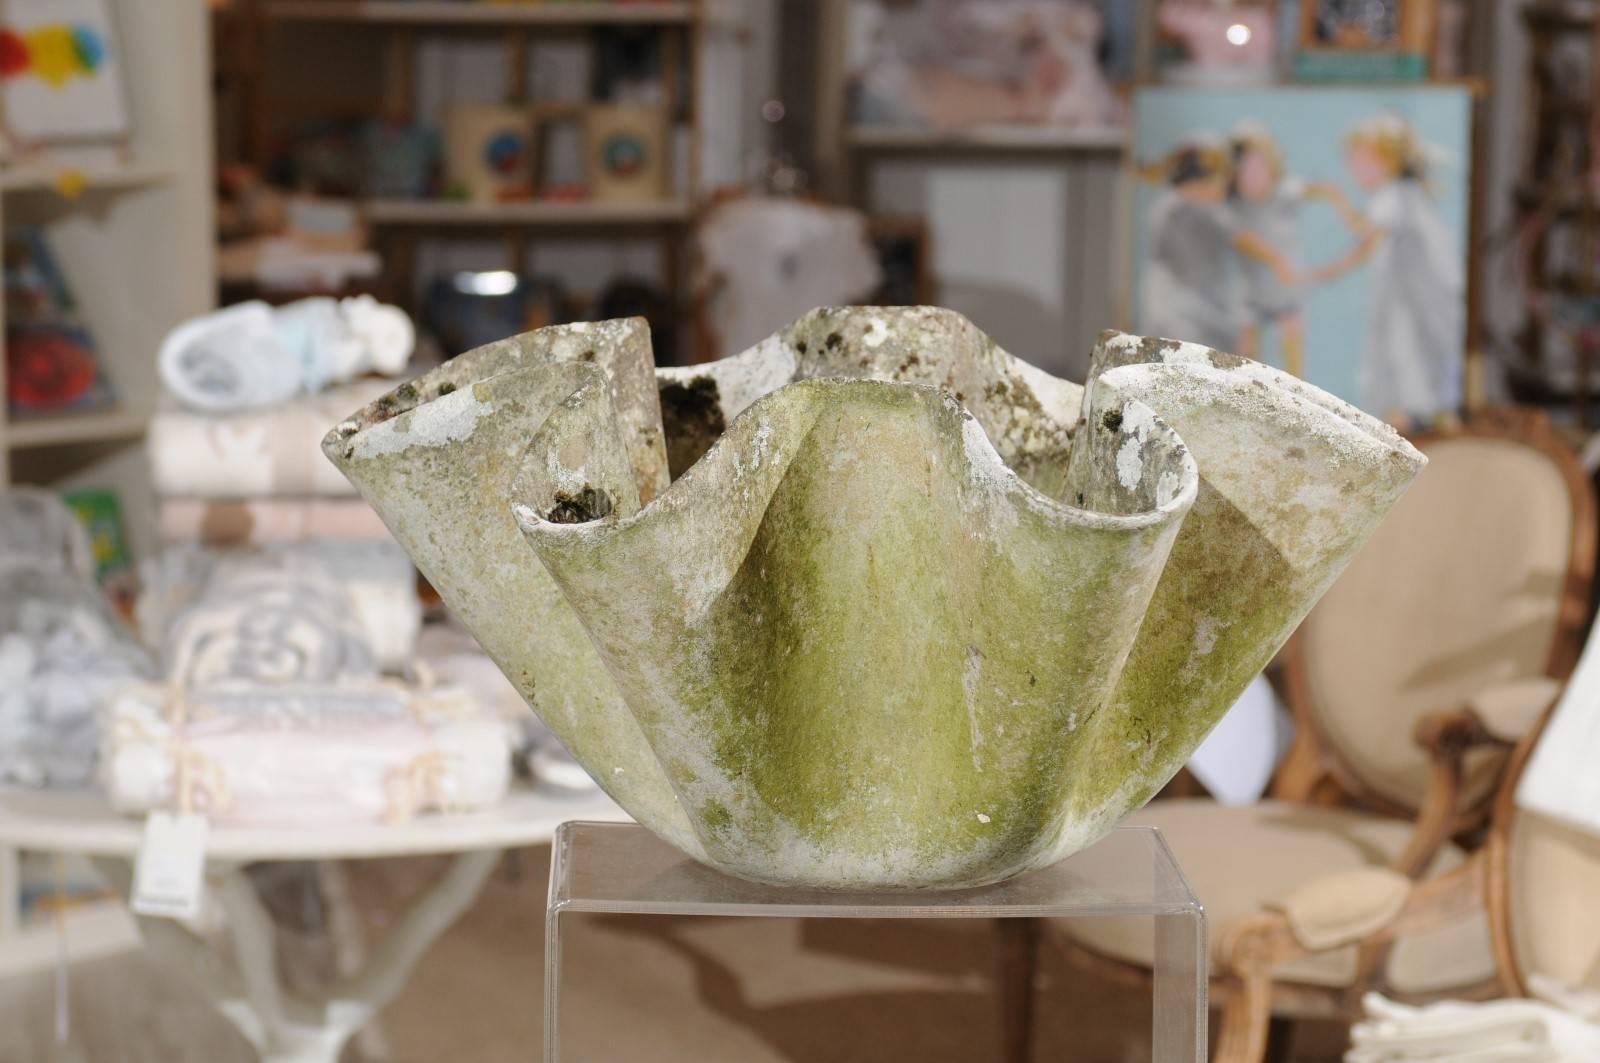 A small size vintage Willy Guhl 'Mouchoir' handkerchief concrete planter from the mid 20th century. We make a beeline for anything Willy Guhl the minute we see it! This unusually shaped concrete planter is called a 